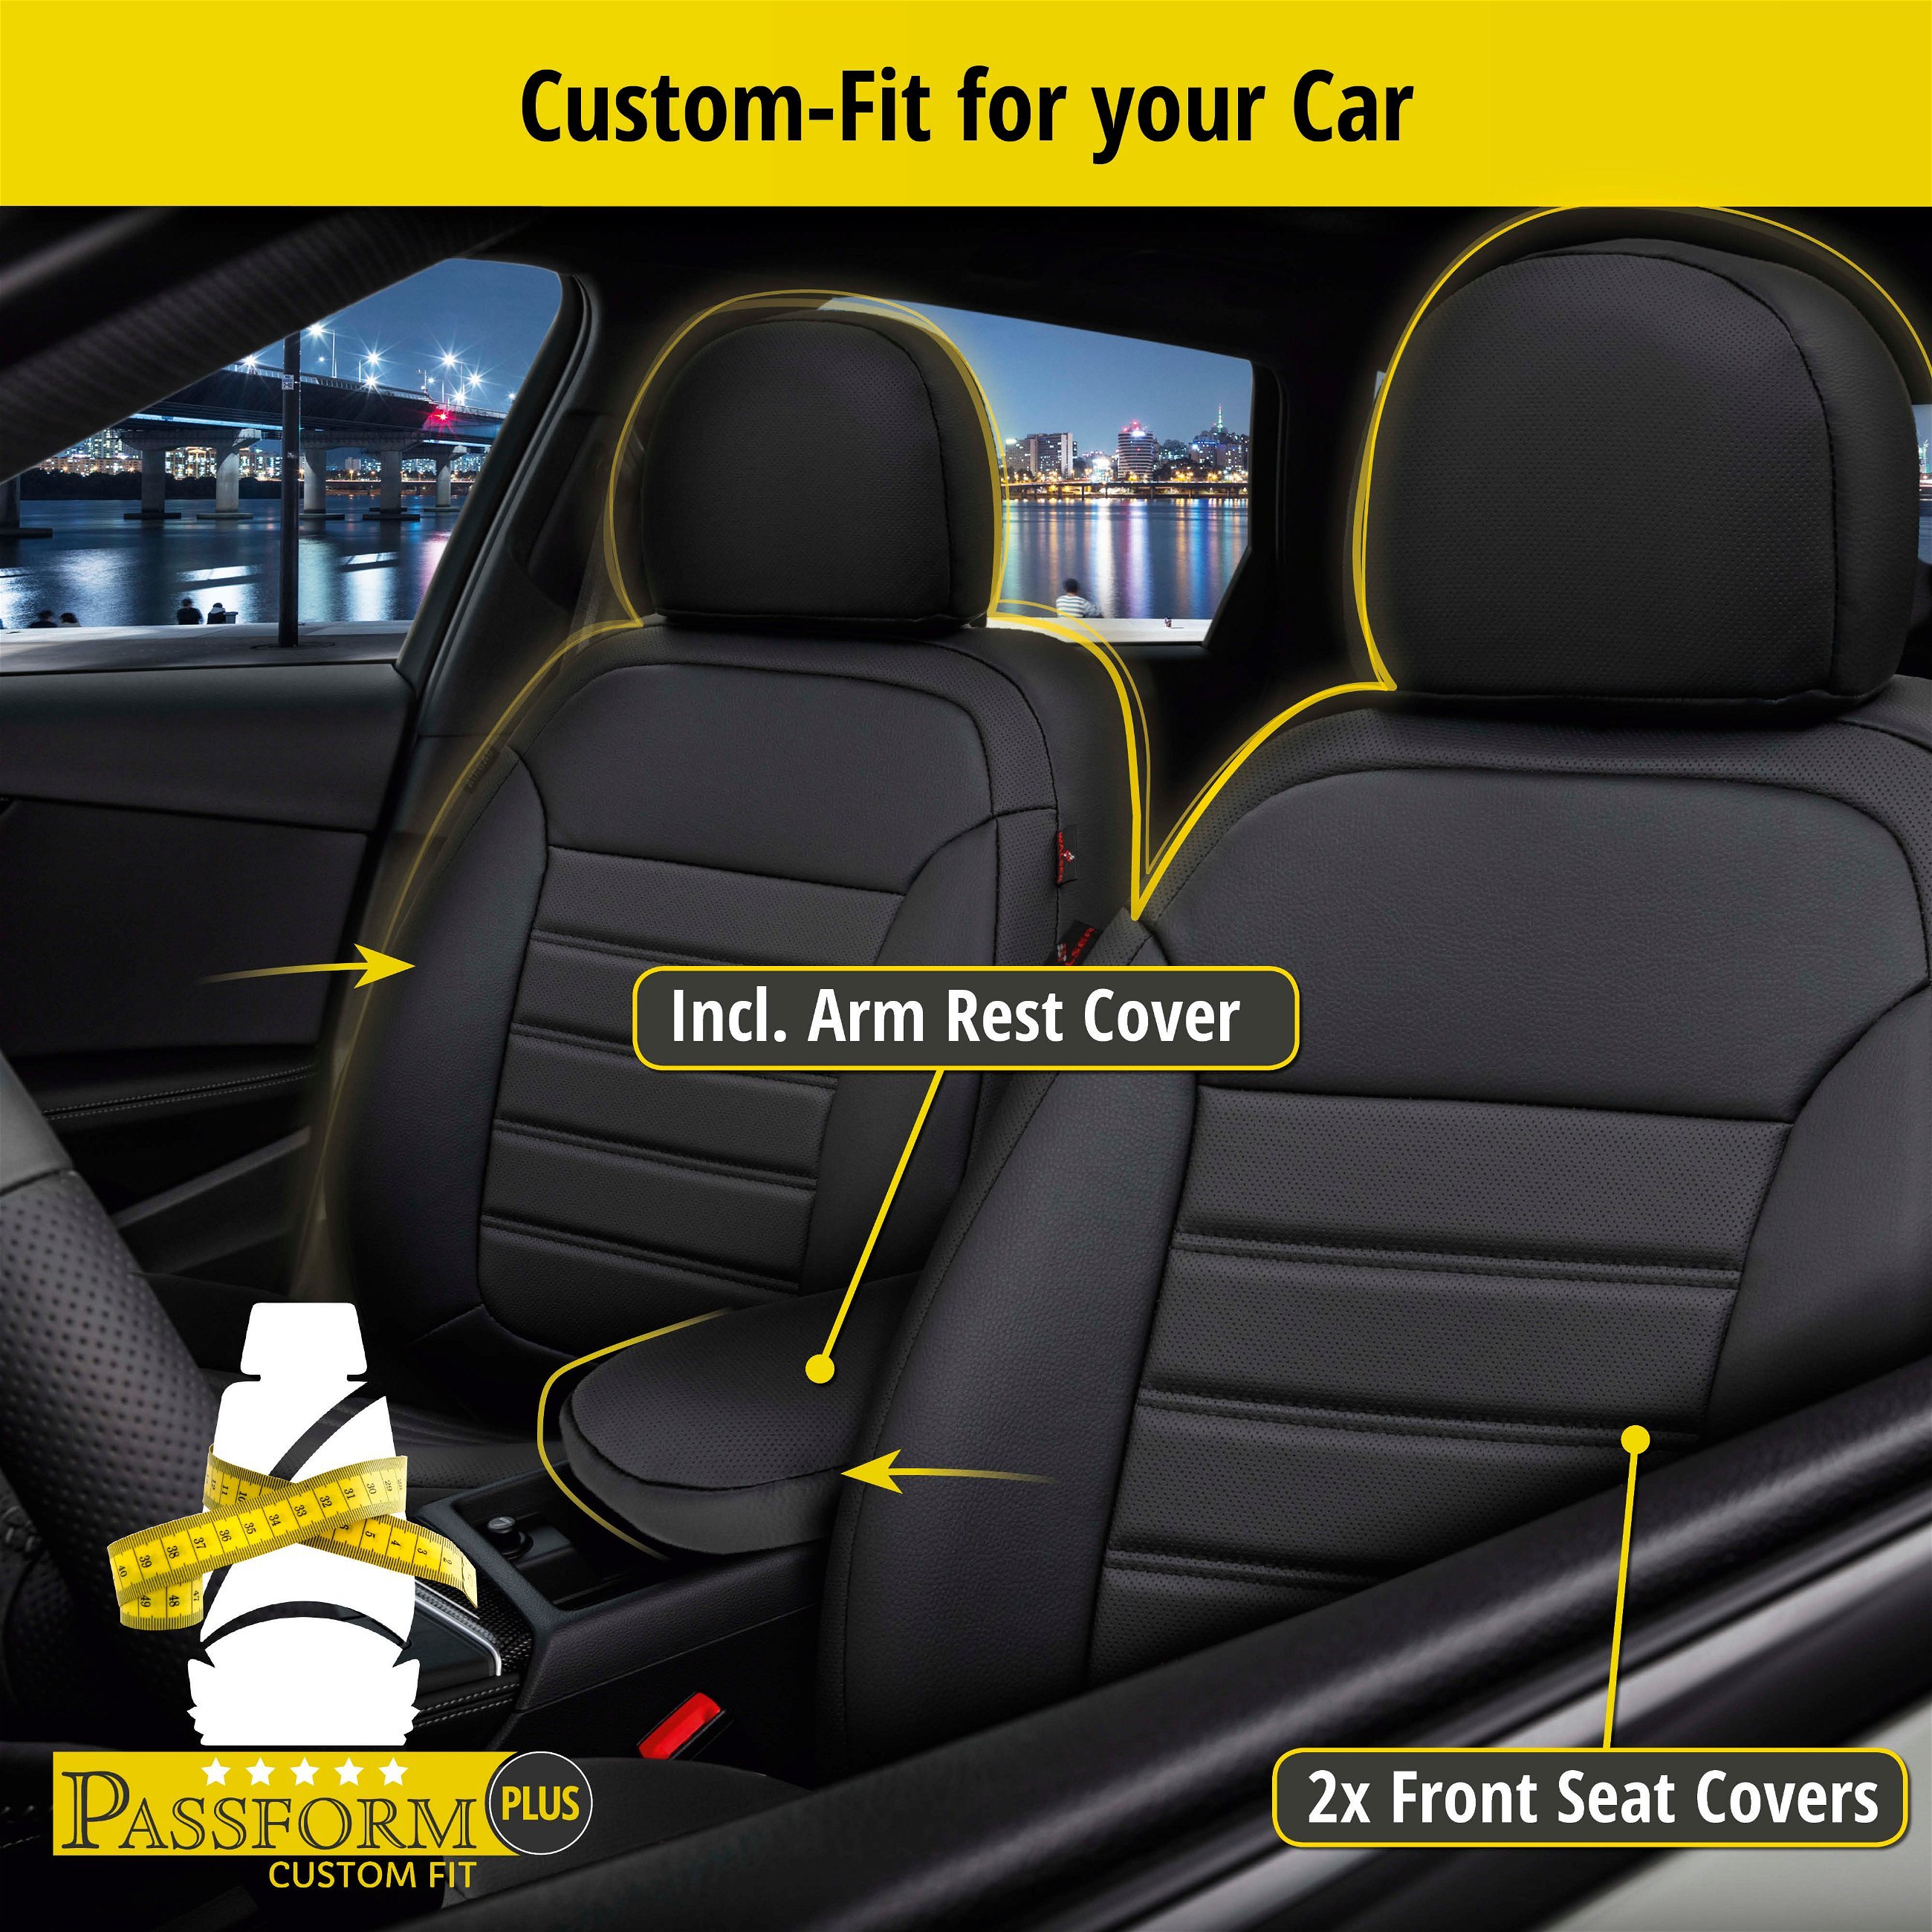 Seat Cover Robusto for Audi A6 Avant (4G5, 4GD, C7) 05/2011-09/2018, 2 seat covers for normal seats